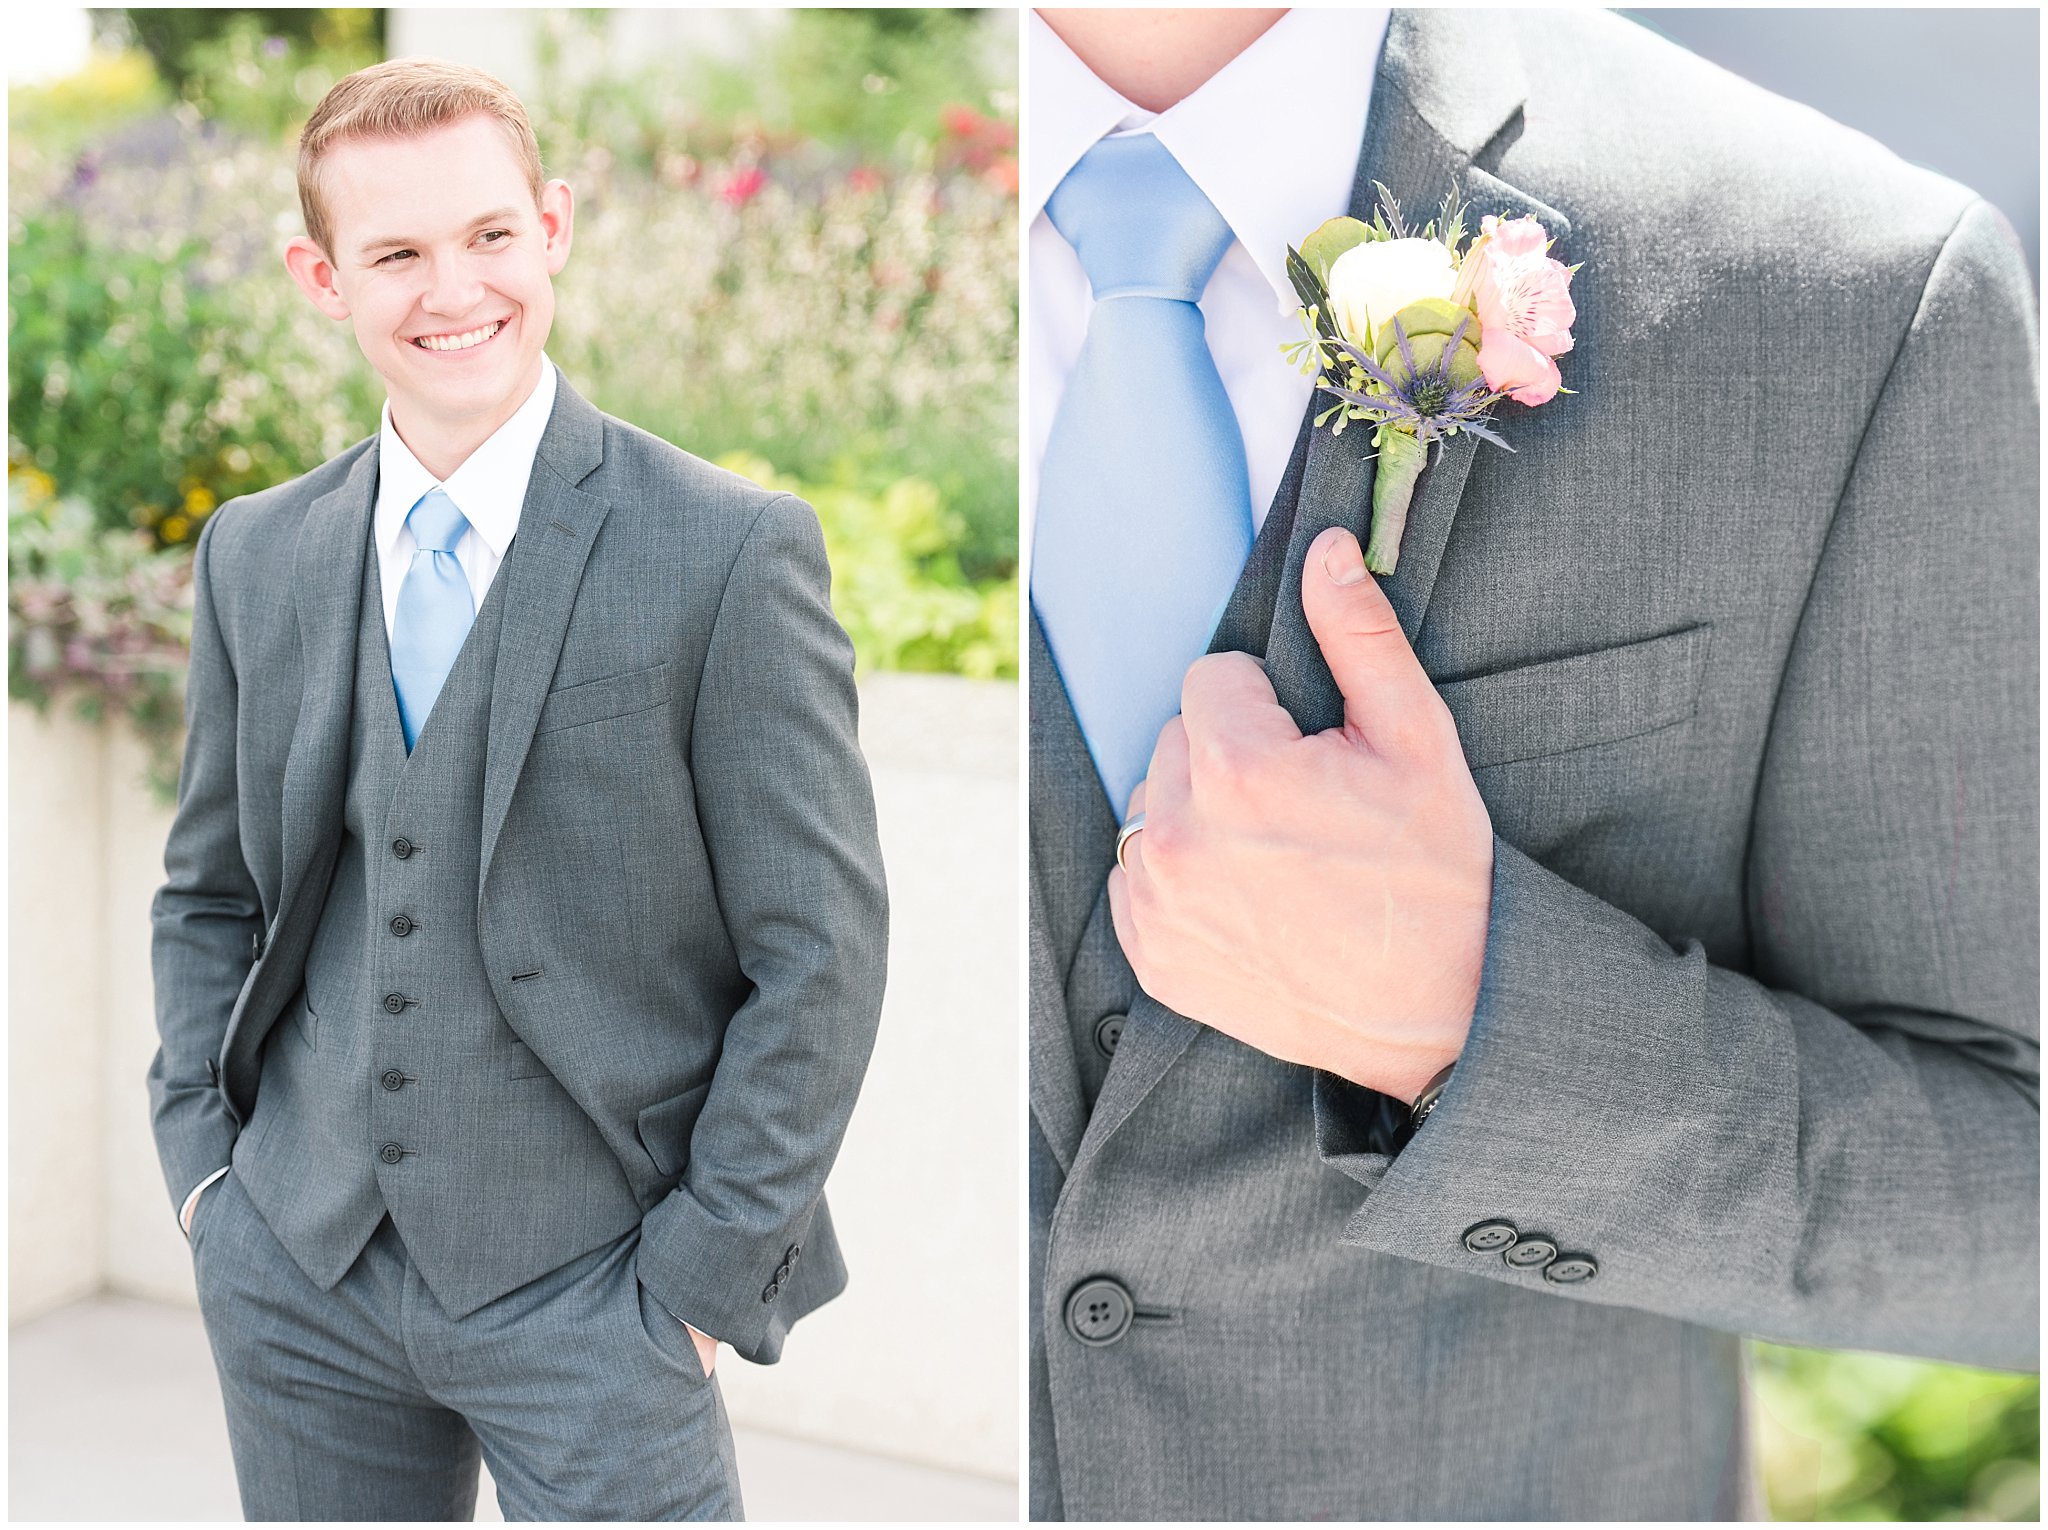 Groom wearing grey suit with light blue tie | bride and groom portraits | Ogden Temple Summer Wedding | Jessie and Dallin Photography